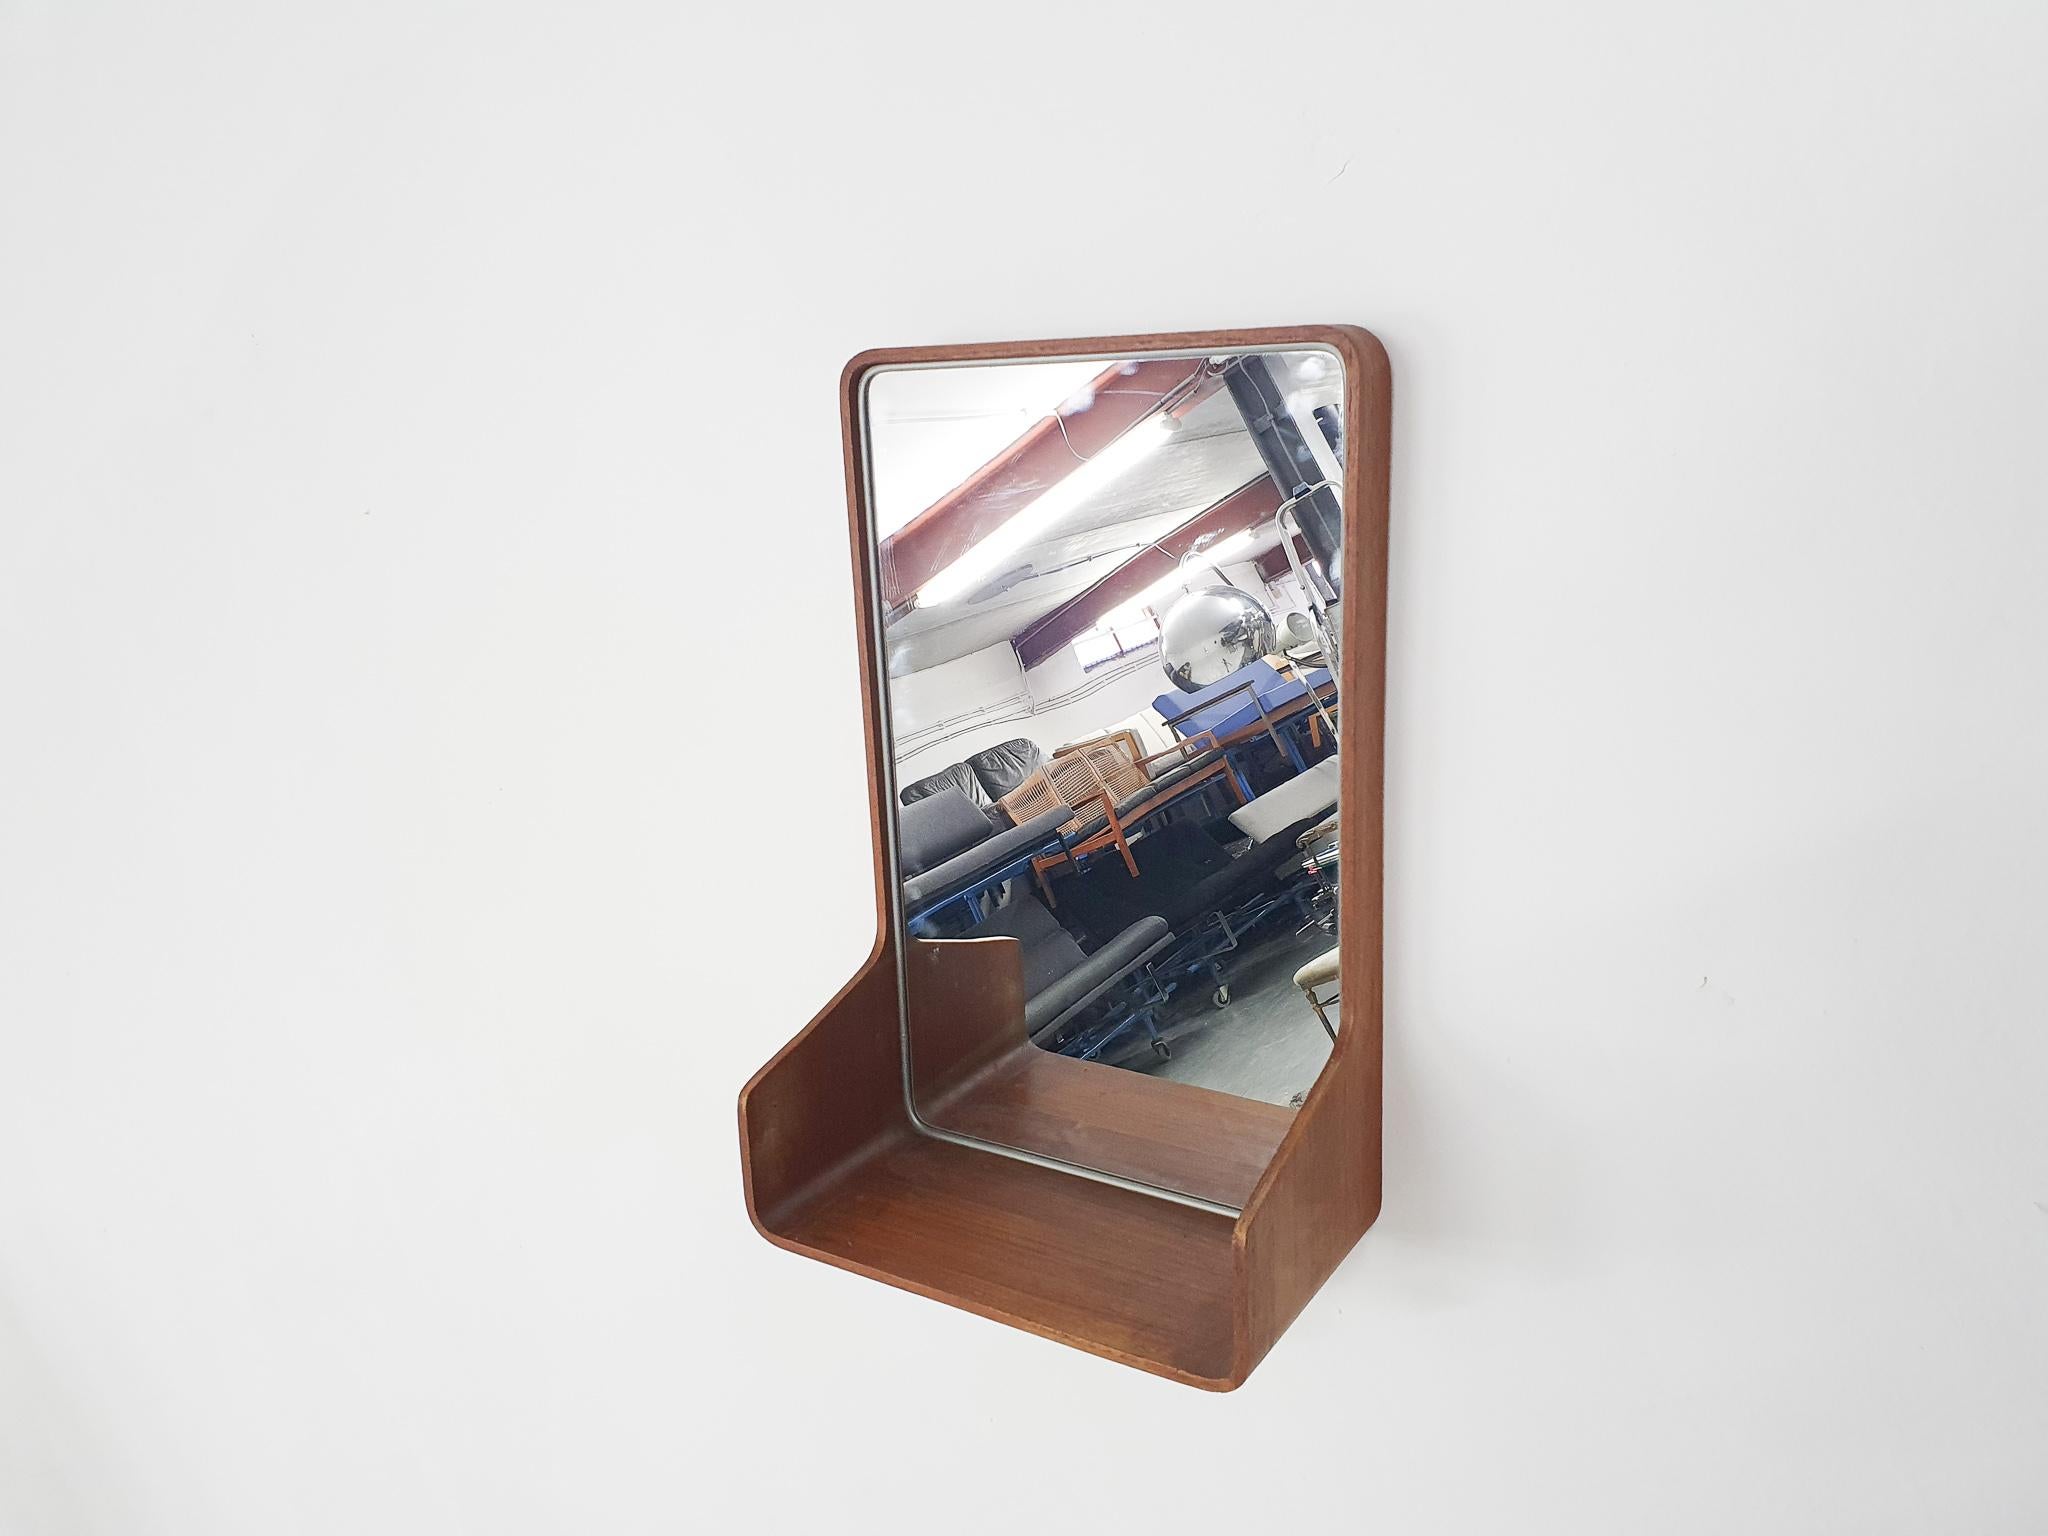 Set of 2 Plywood mirrors designed by Friso Kramer for Auping. One with a glass shelf and space to store items and one without the glass shelf.
The plywood has some normal traces of use.

Friso Kramer
Kramer is the son of architect Piet Kramer. In